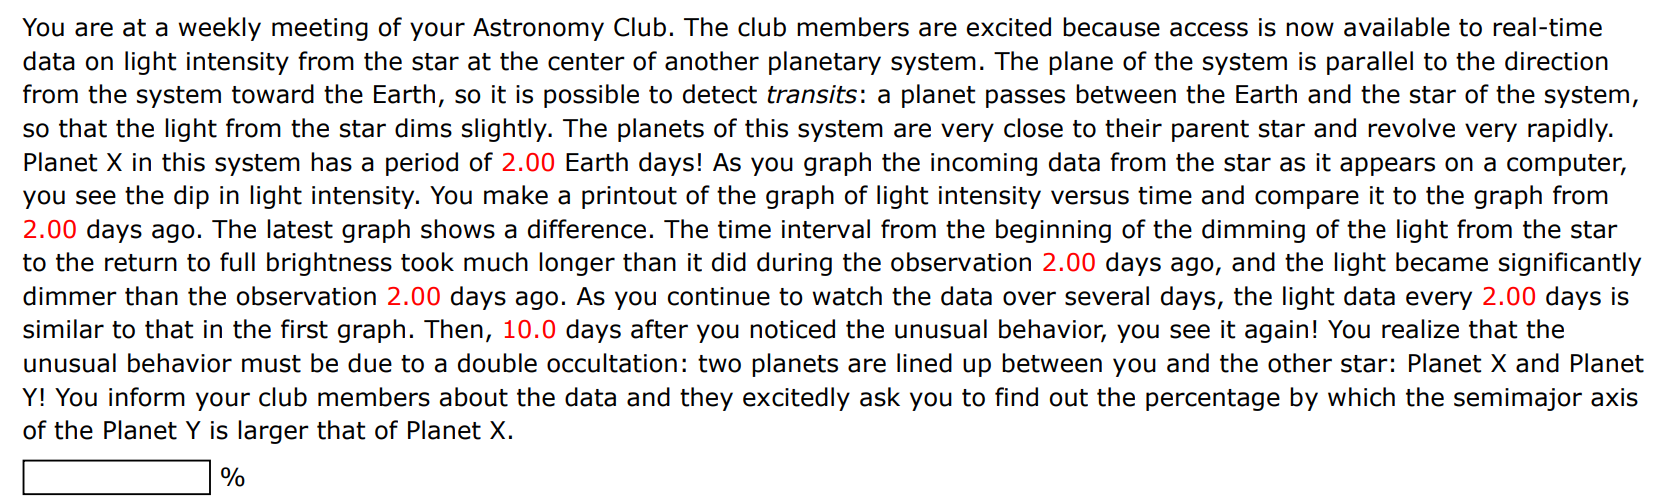 You are at a weekly meeting of your Astronomy Club. The club members are excited because access is now available to real-time data on light intensity from the star at the center of another planetary system. The plane of the system is parallel to the direction from the system toward the Earth, so it is possible to detect transits: a planet passes between the Earth and the star of the system, so that the light from the star dims slightly. The planets of this system are very close to their parent star and revolve very rapidly. Planet X in this system has a period of 2.00 Earth days! As you graph the incoming data from the star as it appears on a computer, you see the dip in light intensity. You make a printout of the graph of light intensity versus time and compare it to the graph from 2.00 days ago. The latest graph shows a difference. The time interval from the beginning of the dimming of the light from the star to the return to full brightness took much longer than it did during the observation 2.00 days ago, and the light became significantly dimmer than the observation 2.00 days ago. As you continue to watch the data over several days, the light data every 2.00 days is similar to that in the first graph. Then, 10.0 days after you noticed the unusual behavior, you see it again! You realize that the unusual behavior must be due to a double occultation: two planets are lined up between you and the other star: Planet X and Planet Y! You inform your club members about the data and they excitedly ask you to find out the percentage by which the semimajor axis of the Planet Y is larger that of Planet X. % 